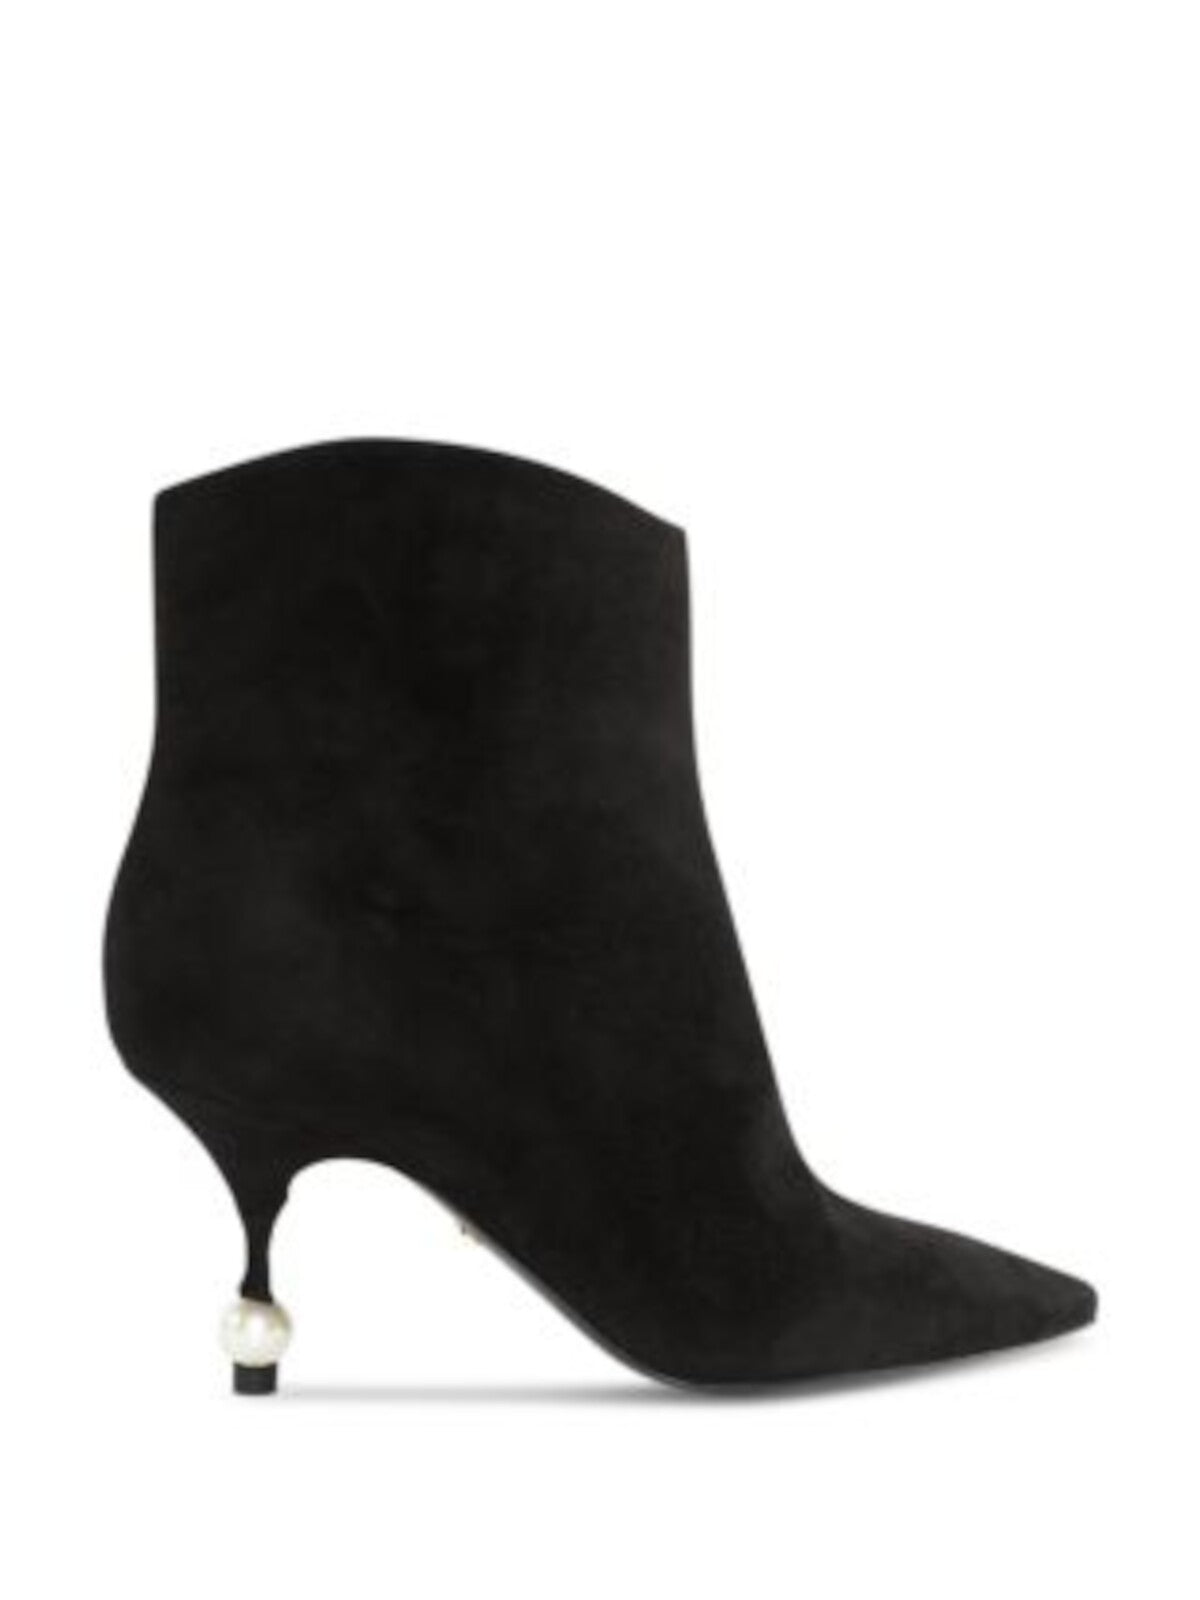 GIAMBATTISTA VALLI Womens Black Embellished Pointed Toe Sculpted Heel Zip-Up Leather Booties 37.5